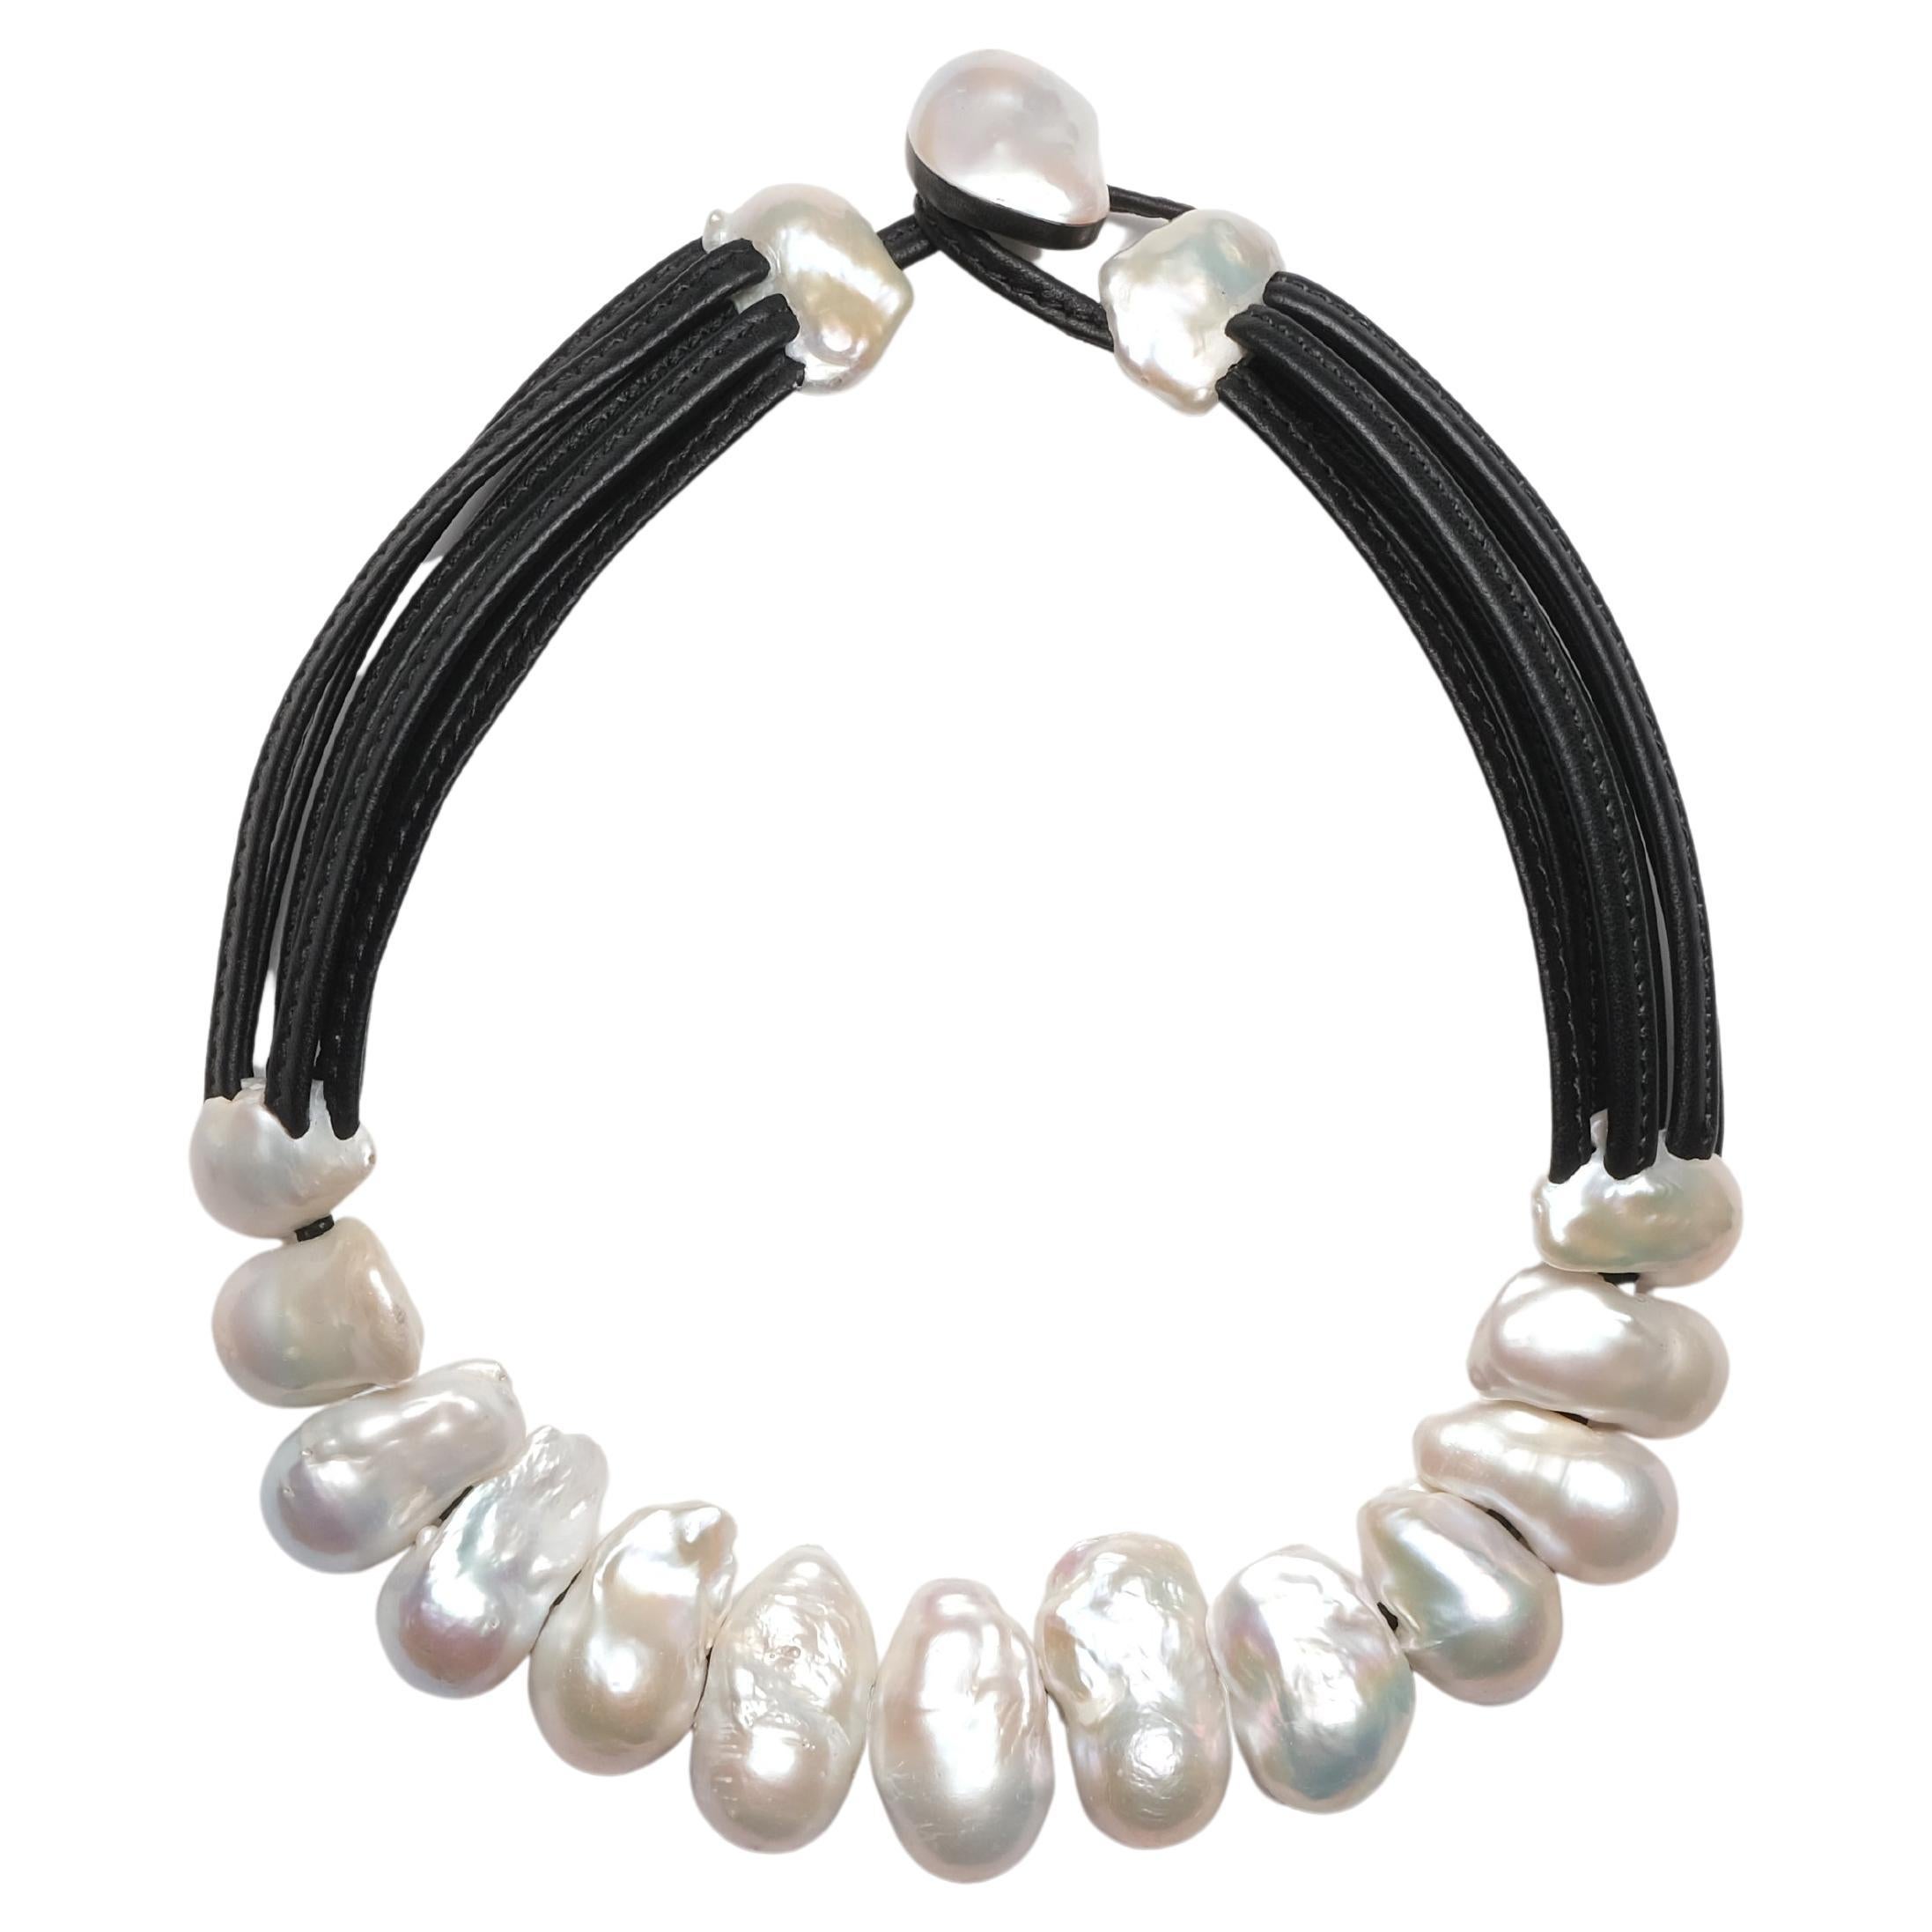 One-of-a-Kind Necklace in Baroque Pearls from the Danish Brand Monies